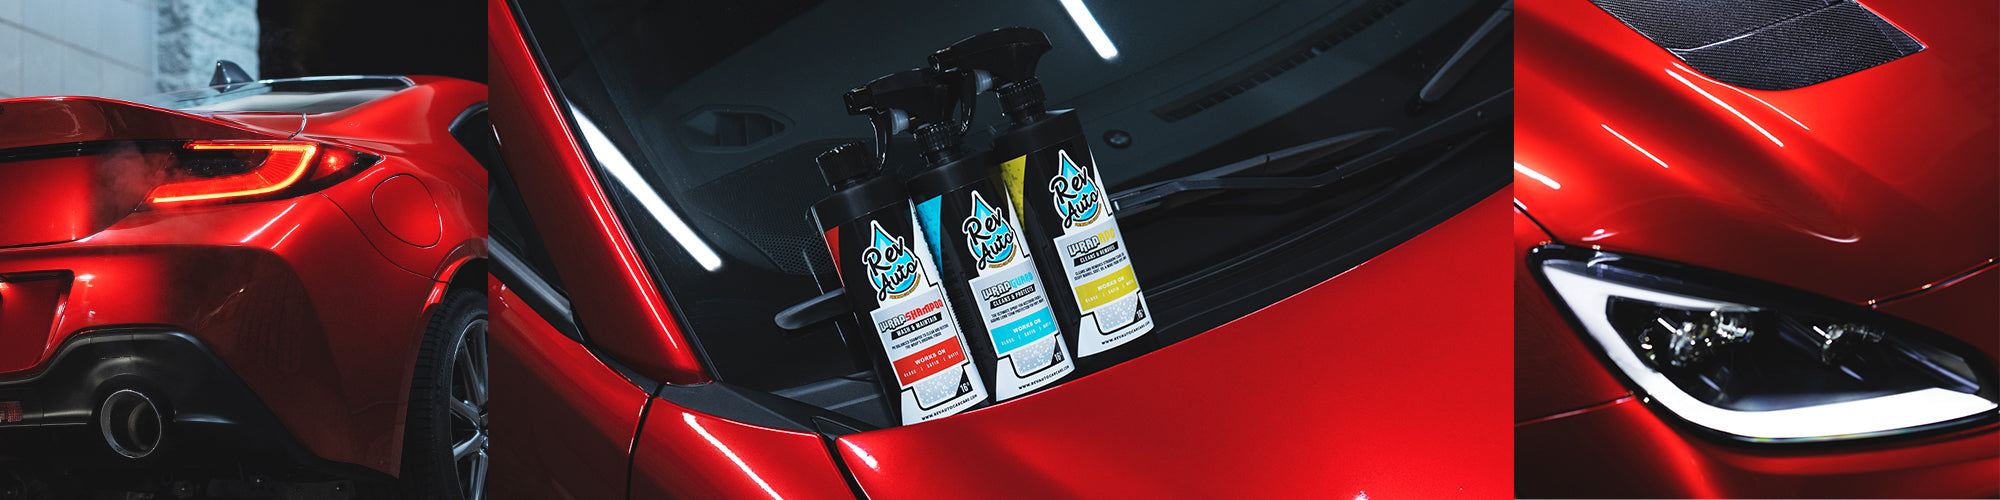 Premium car care products for the enthusiast – REV Auto